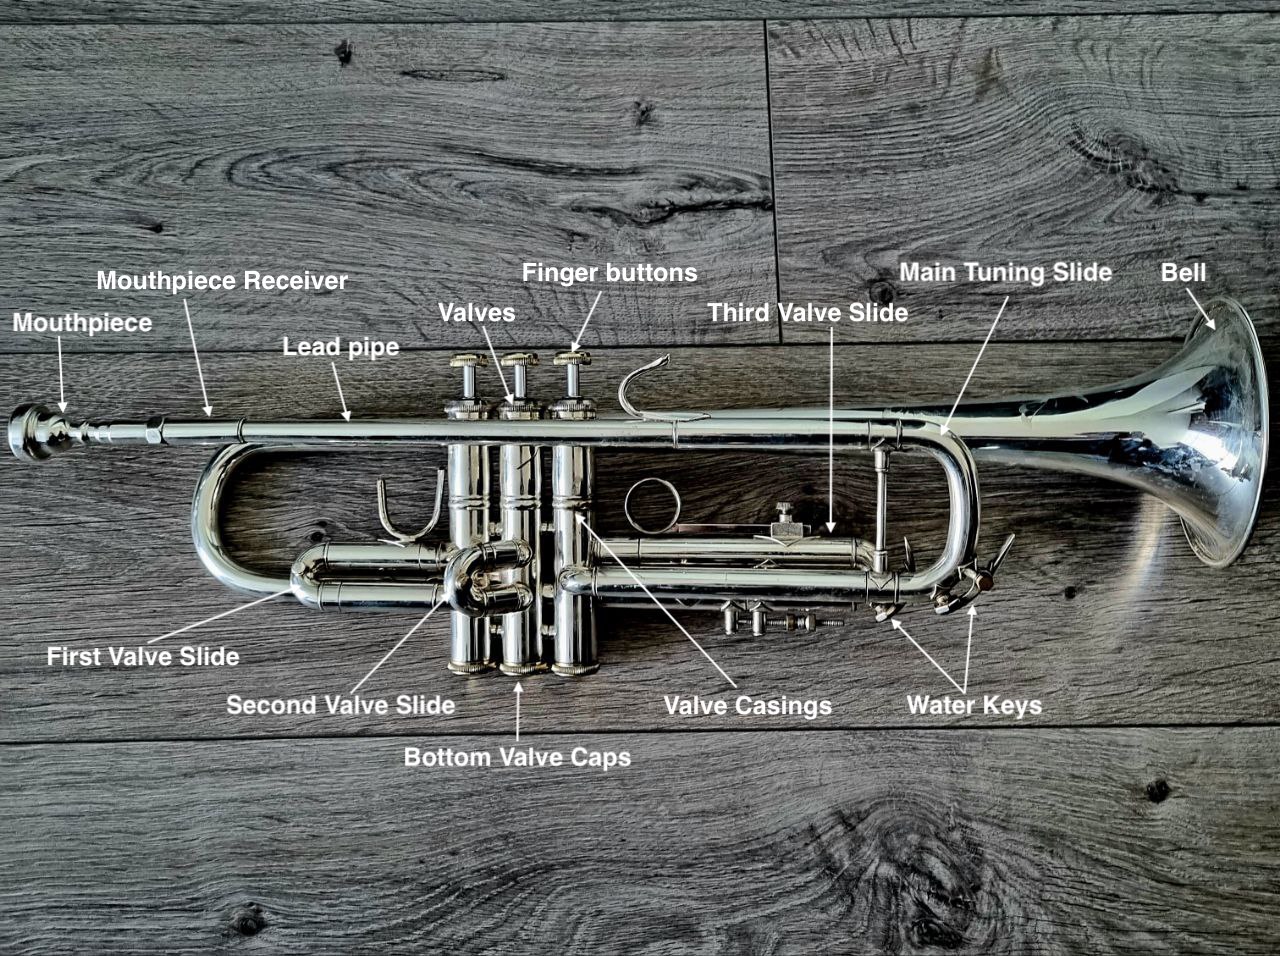 Parts of the trumpet